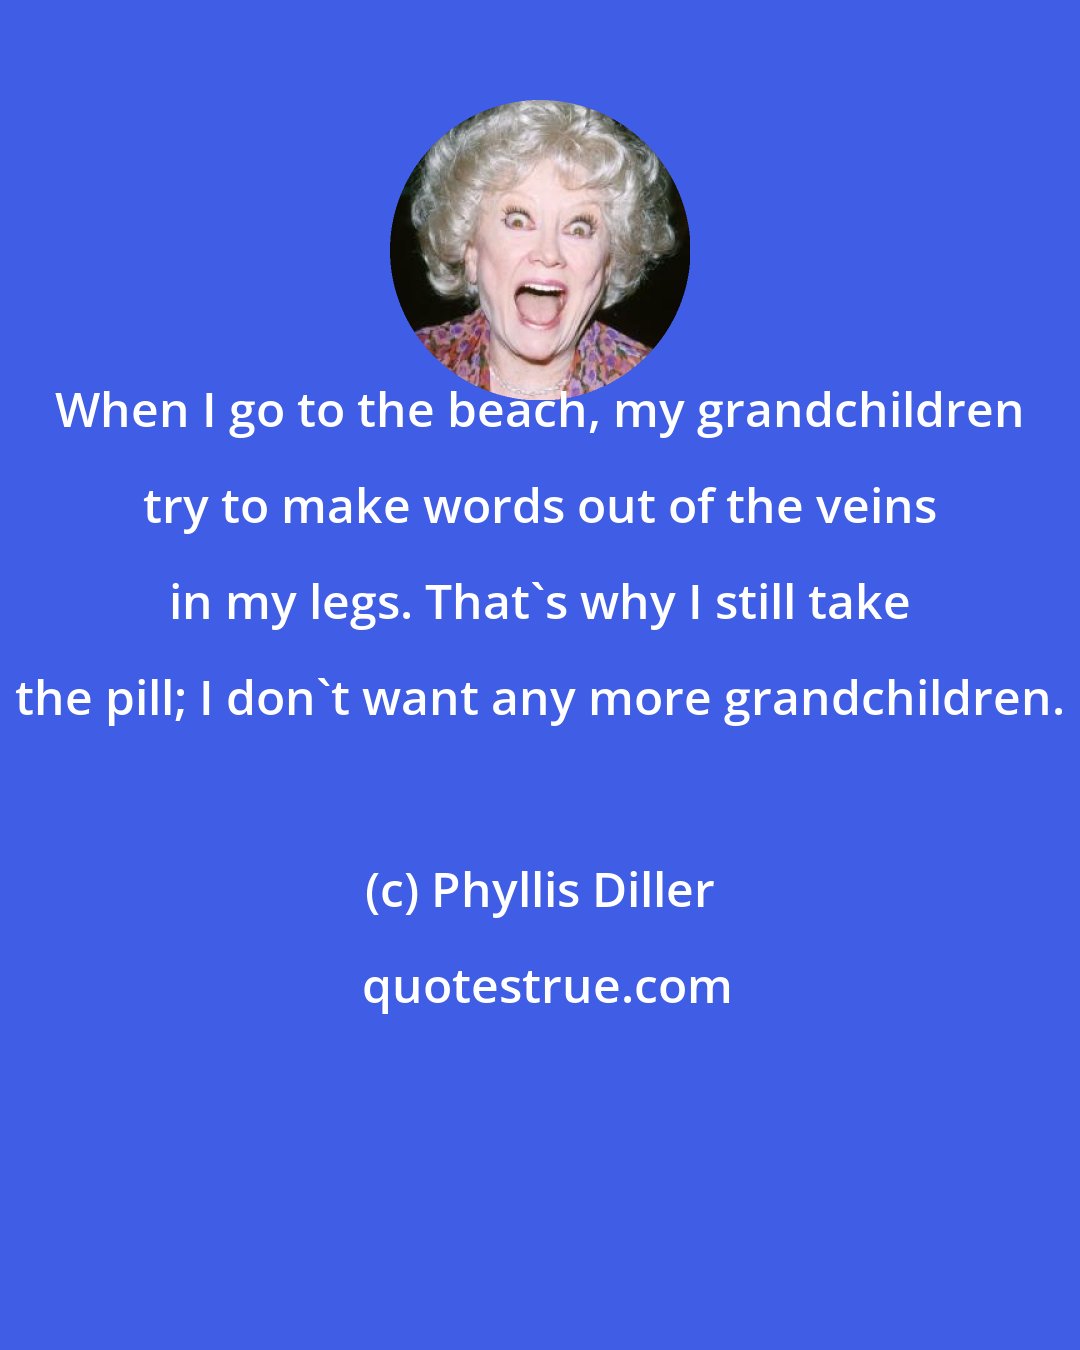 Phyllis Diller: When I go to the beach, my grandchildren try to make words out of the veins in my legs. That's why I still take the pill; I don't want any more grandchildren.